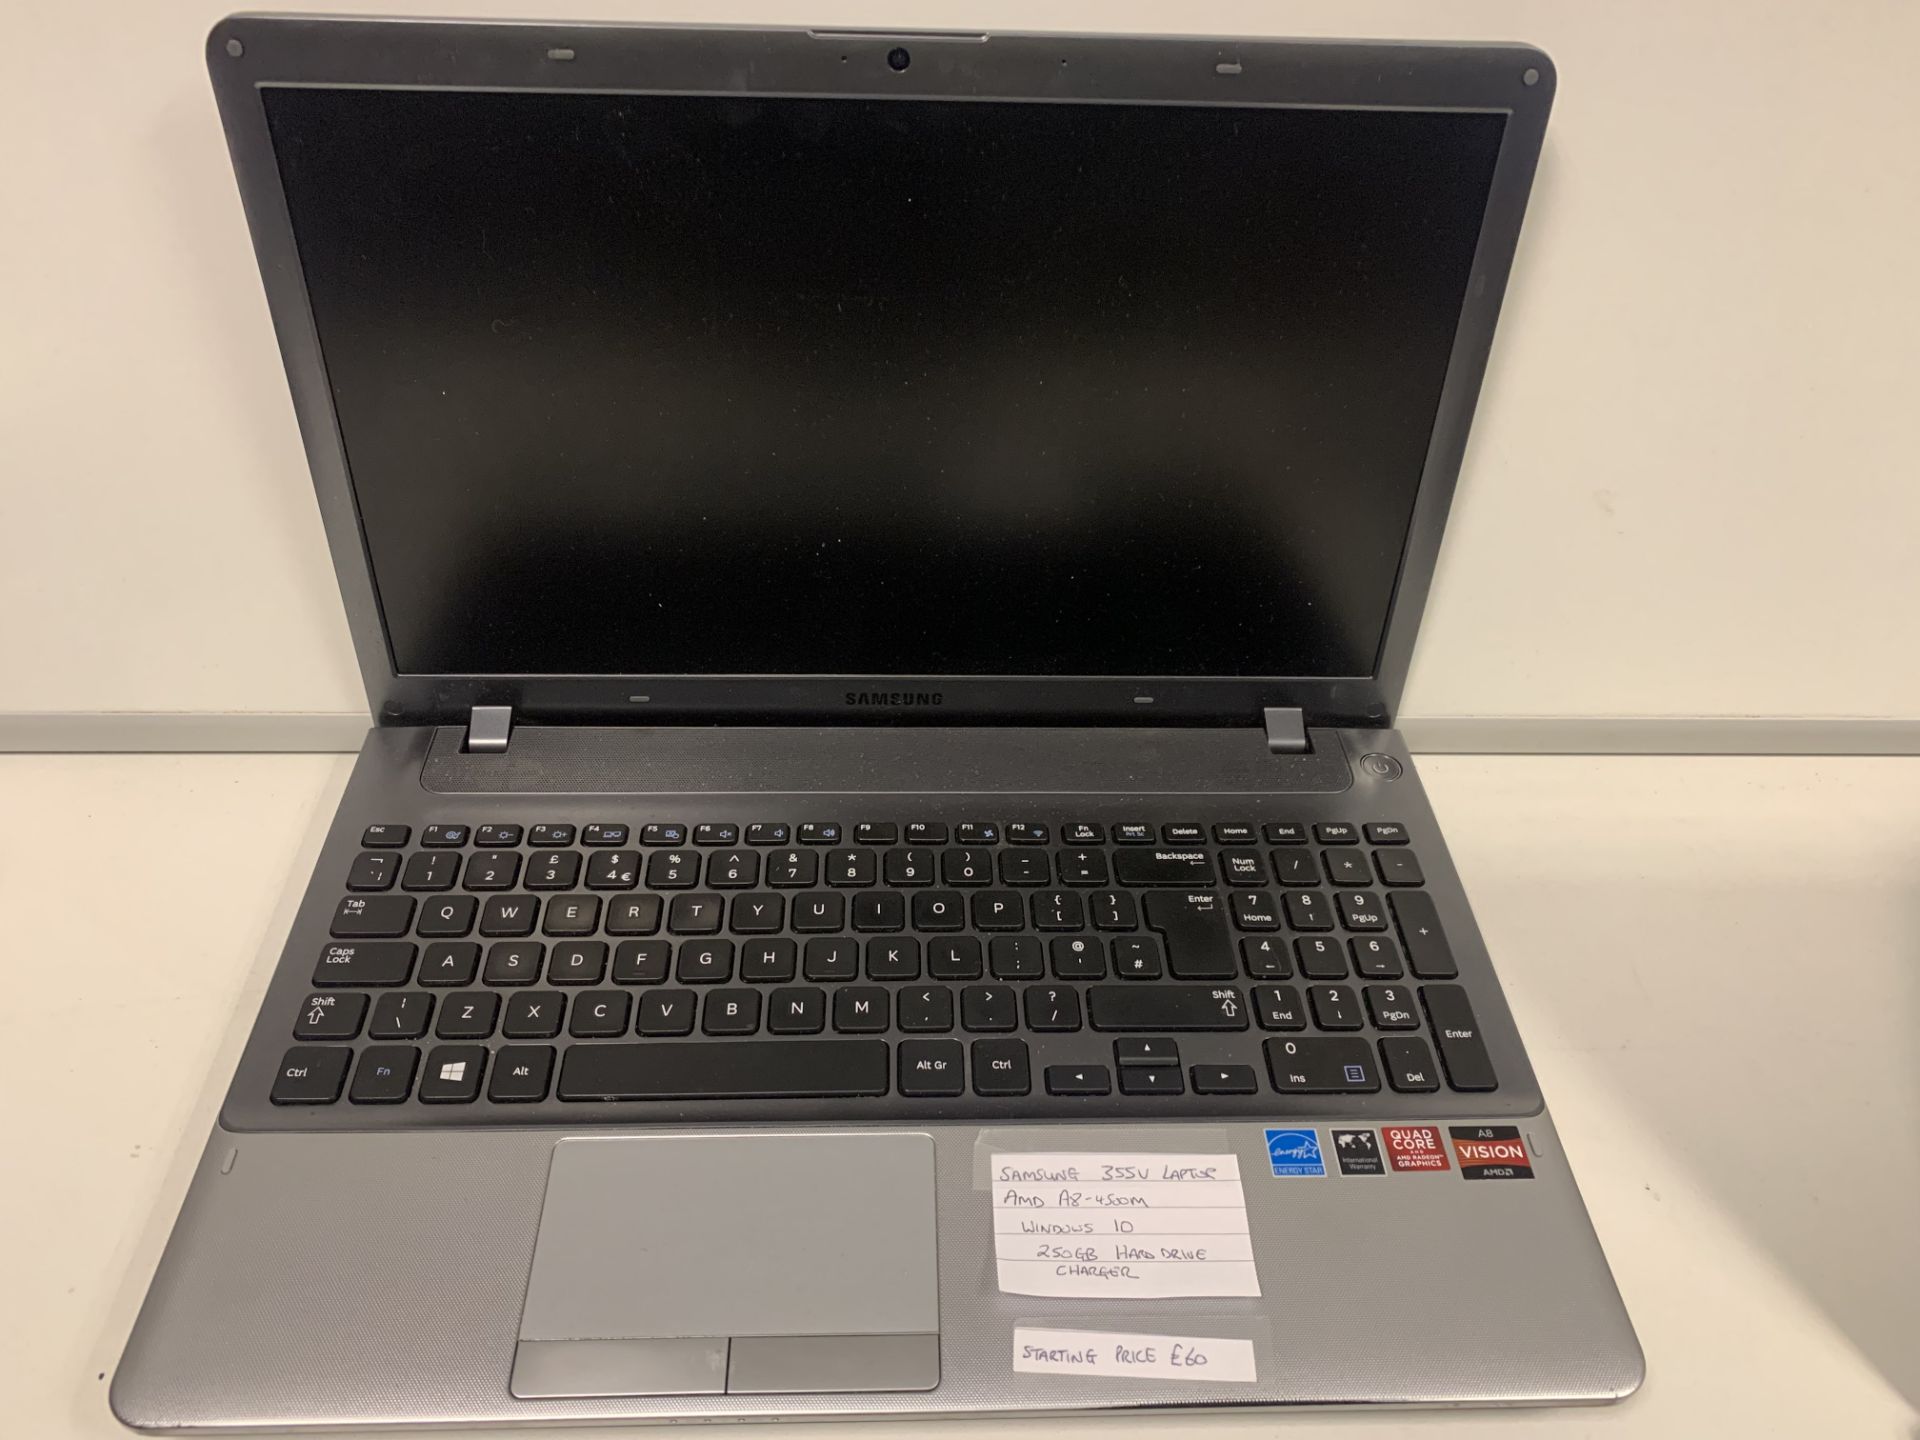 SAMSUNG 355V LAPTOP, AMD A8-4500M, WINDOWS 10, 250GB HARD DRIVE WITH CHARGER